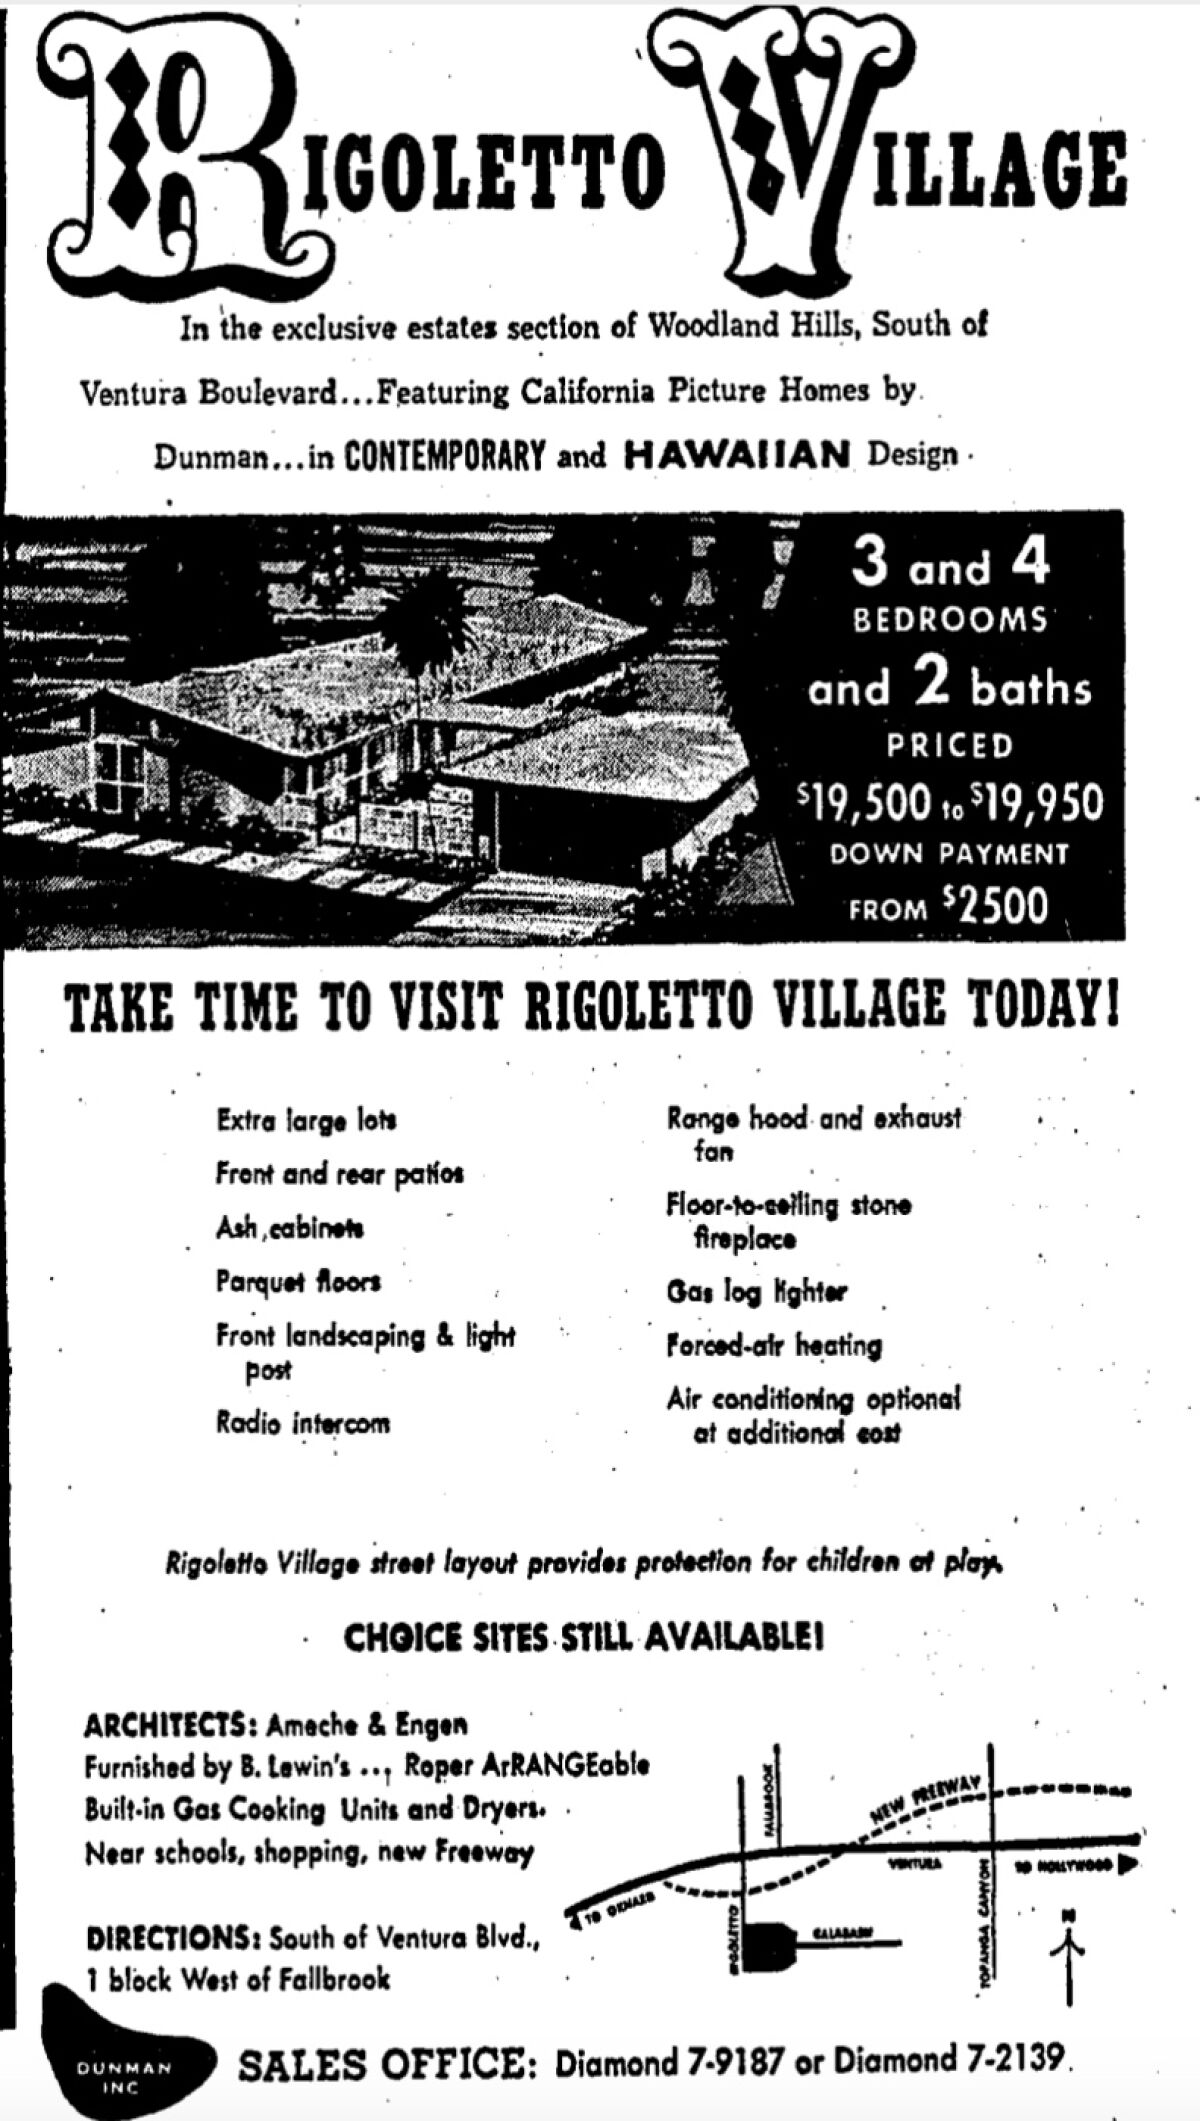 1956 newspaper ad for Rigoletto Village in Woodland Hills. Selling points included extra large lots and optional AC.